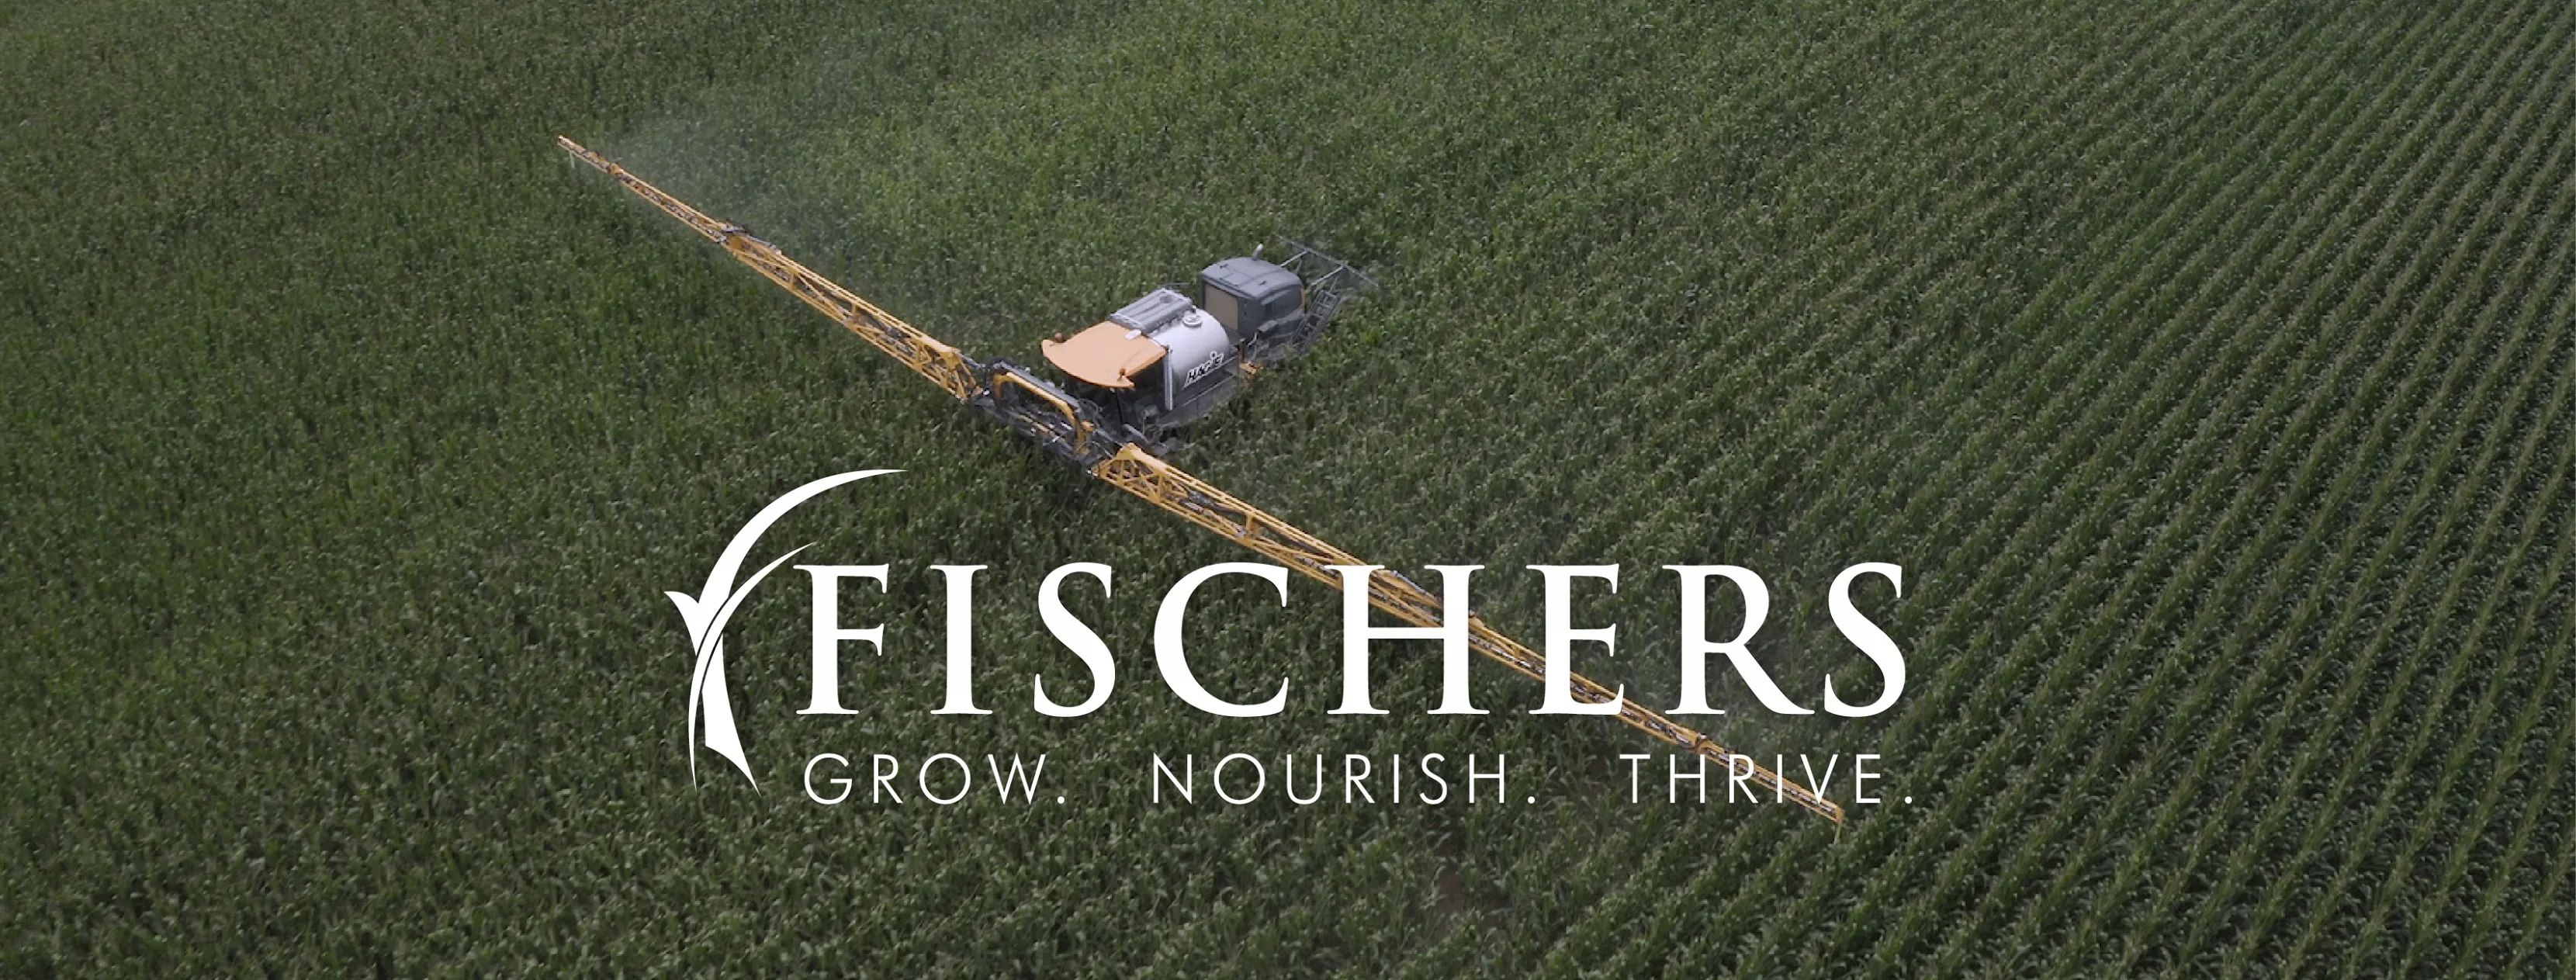 Fischers Food Grade, Seeds, and Farms